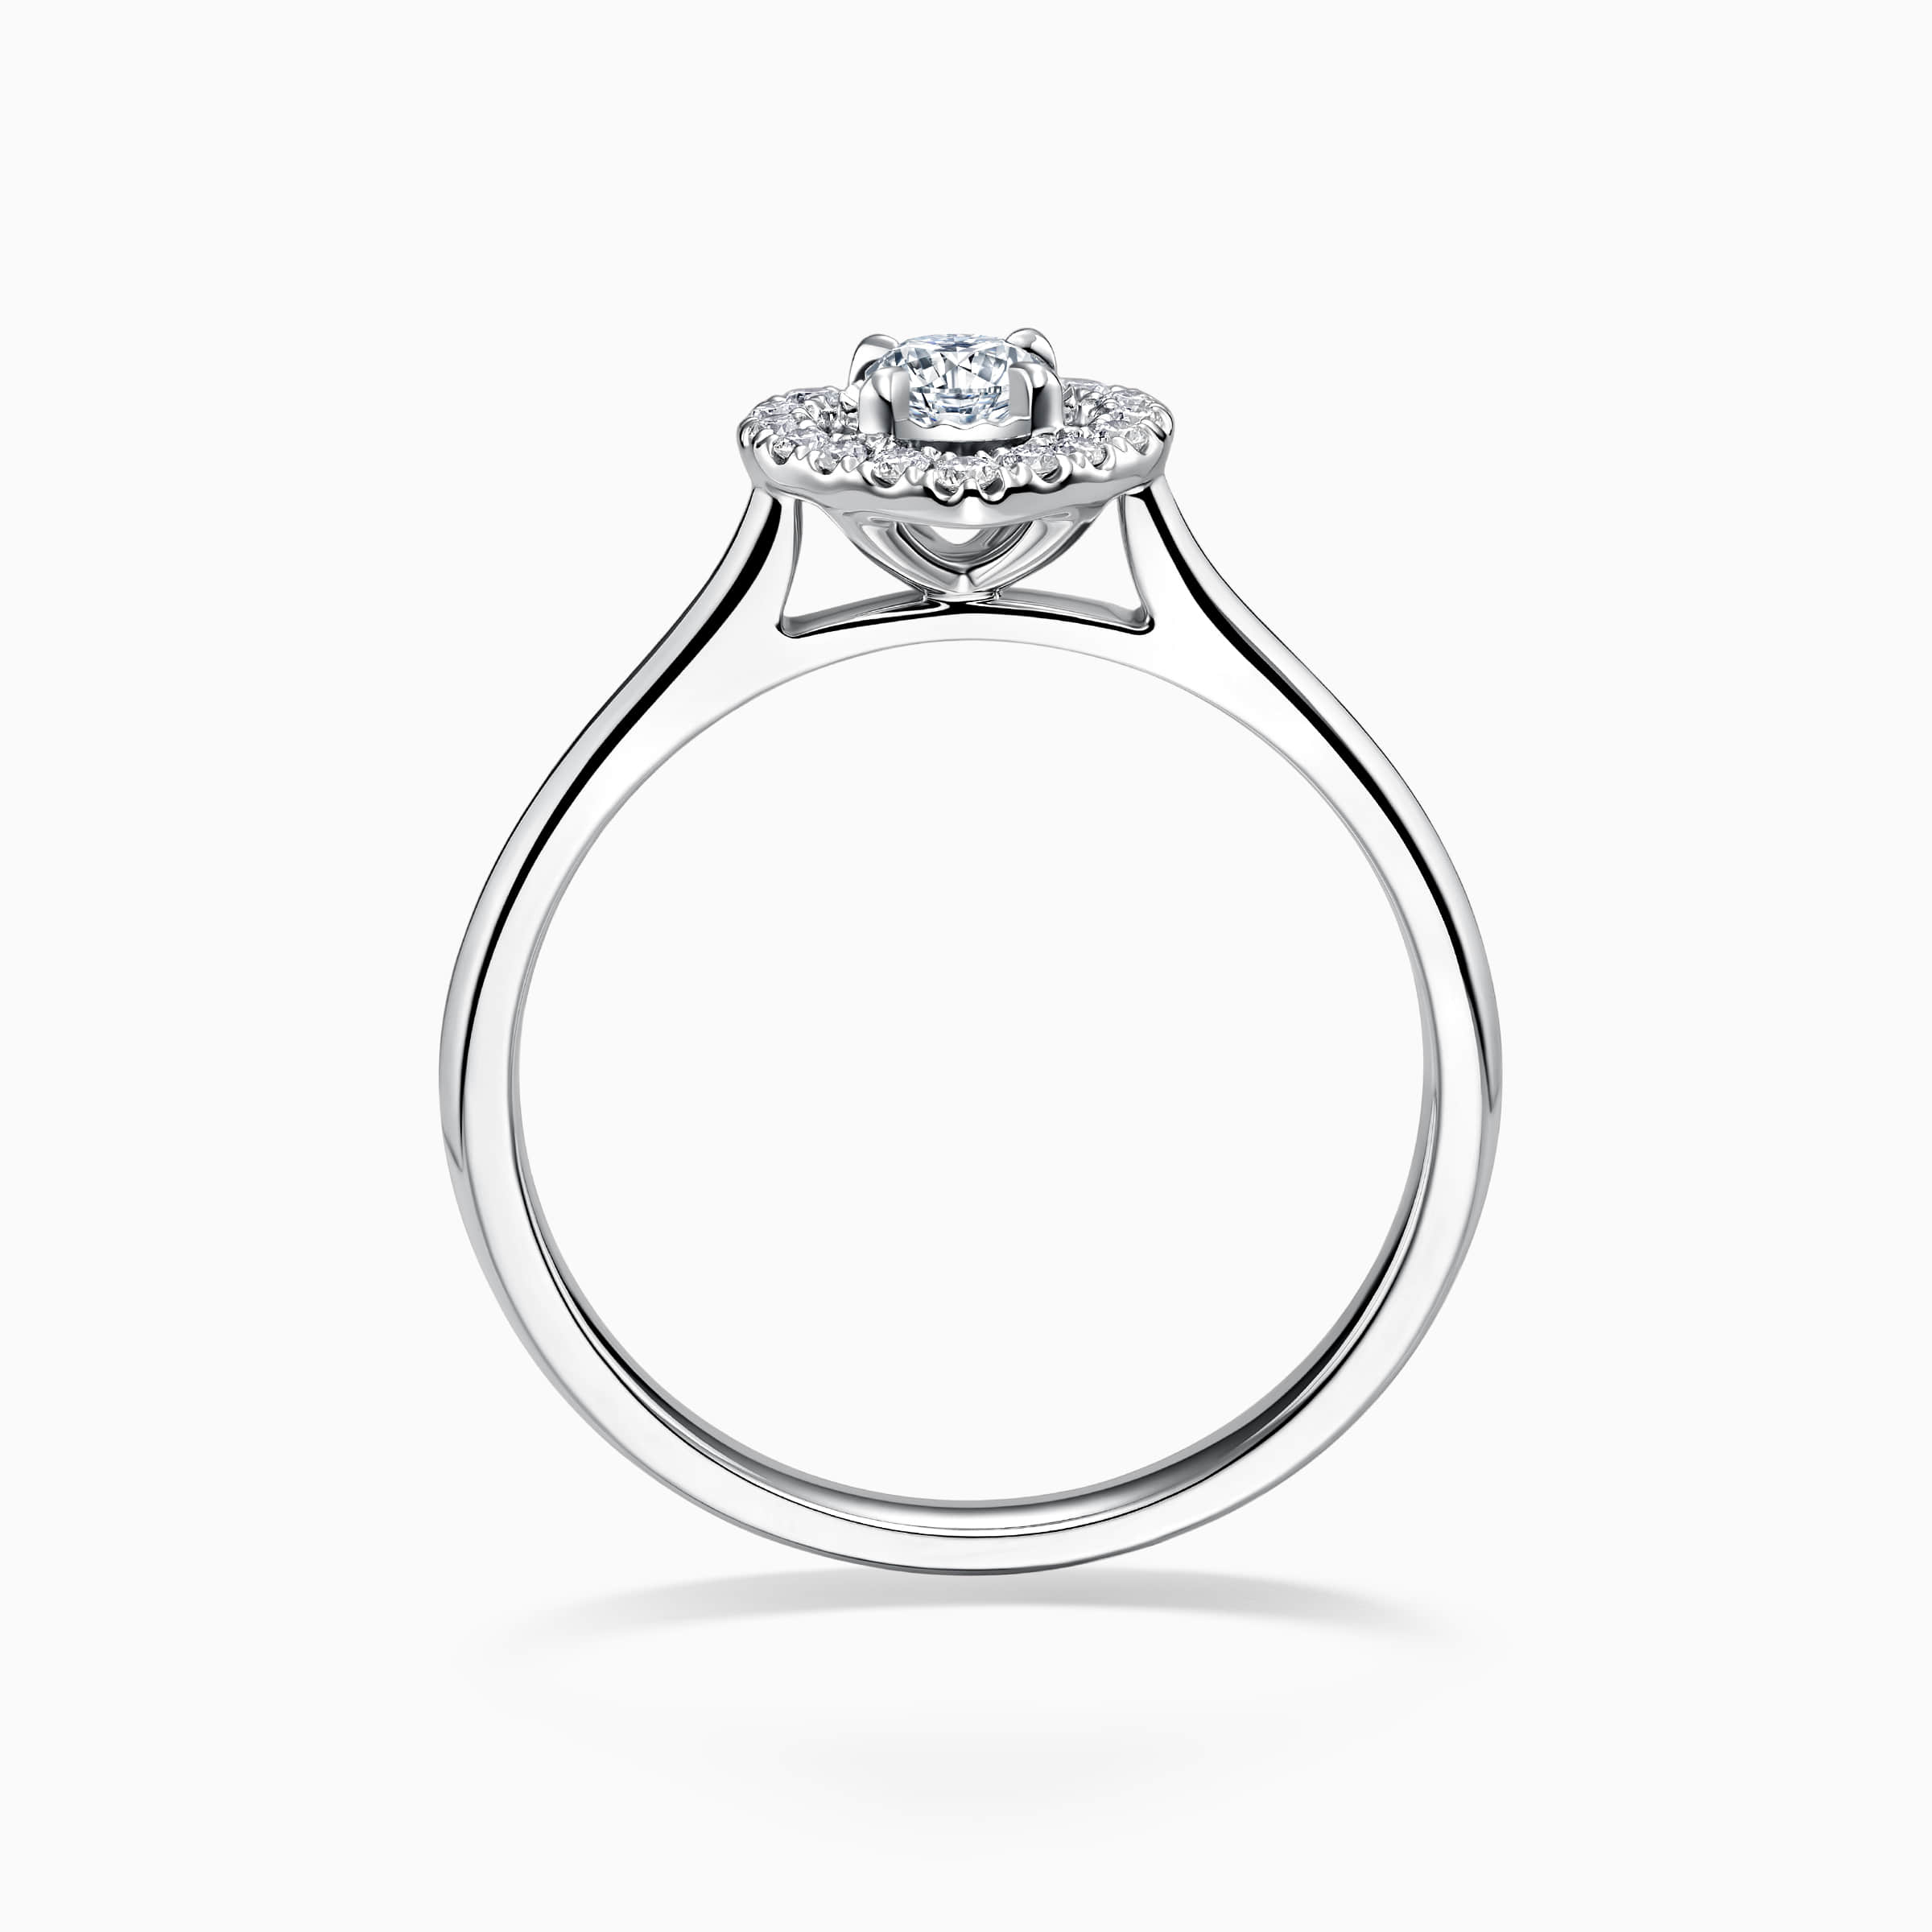 darry ring heart halo engagement ring side view